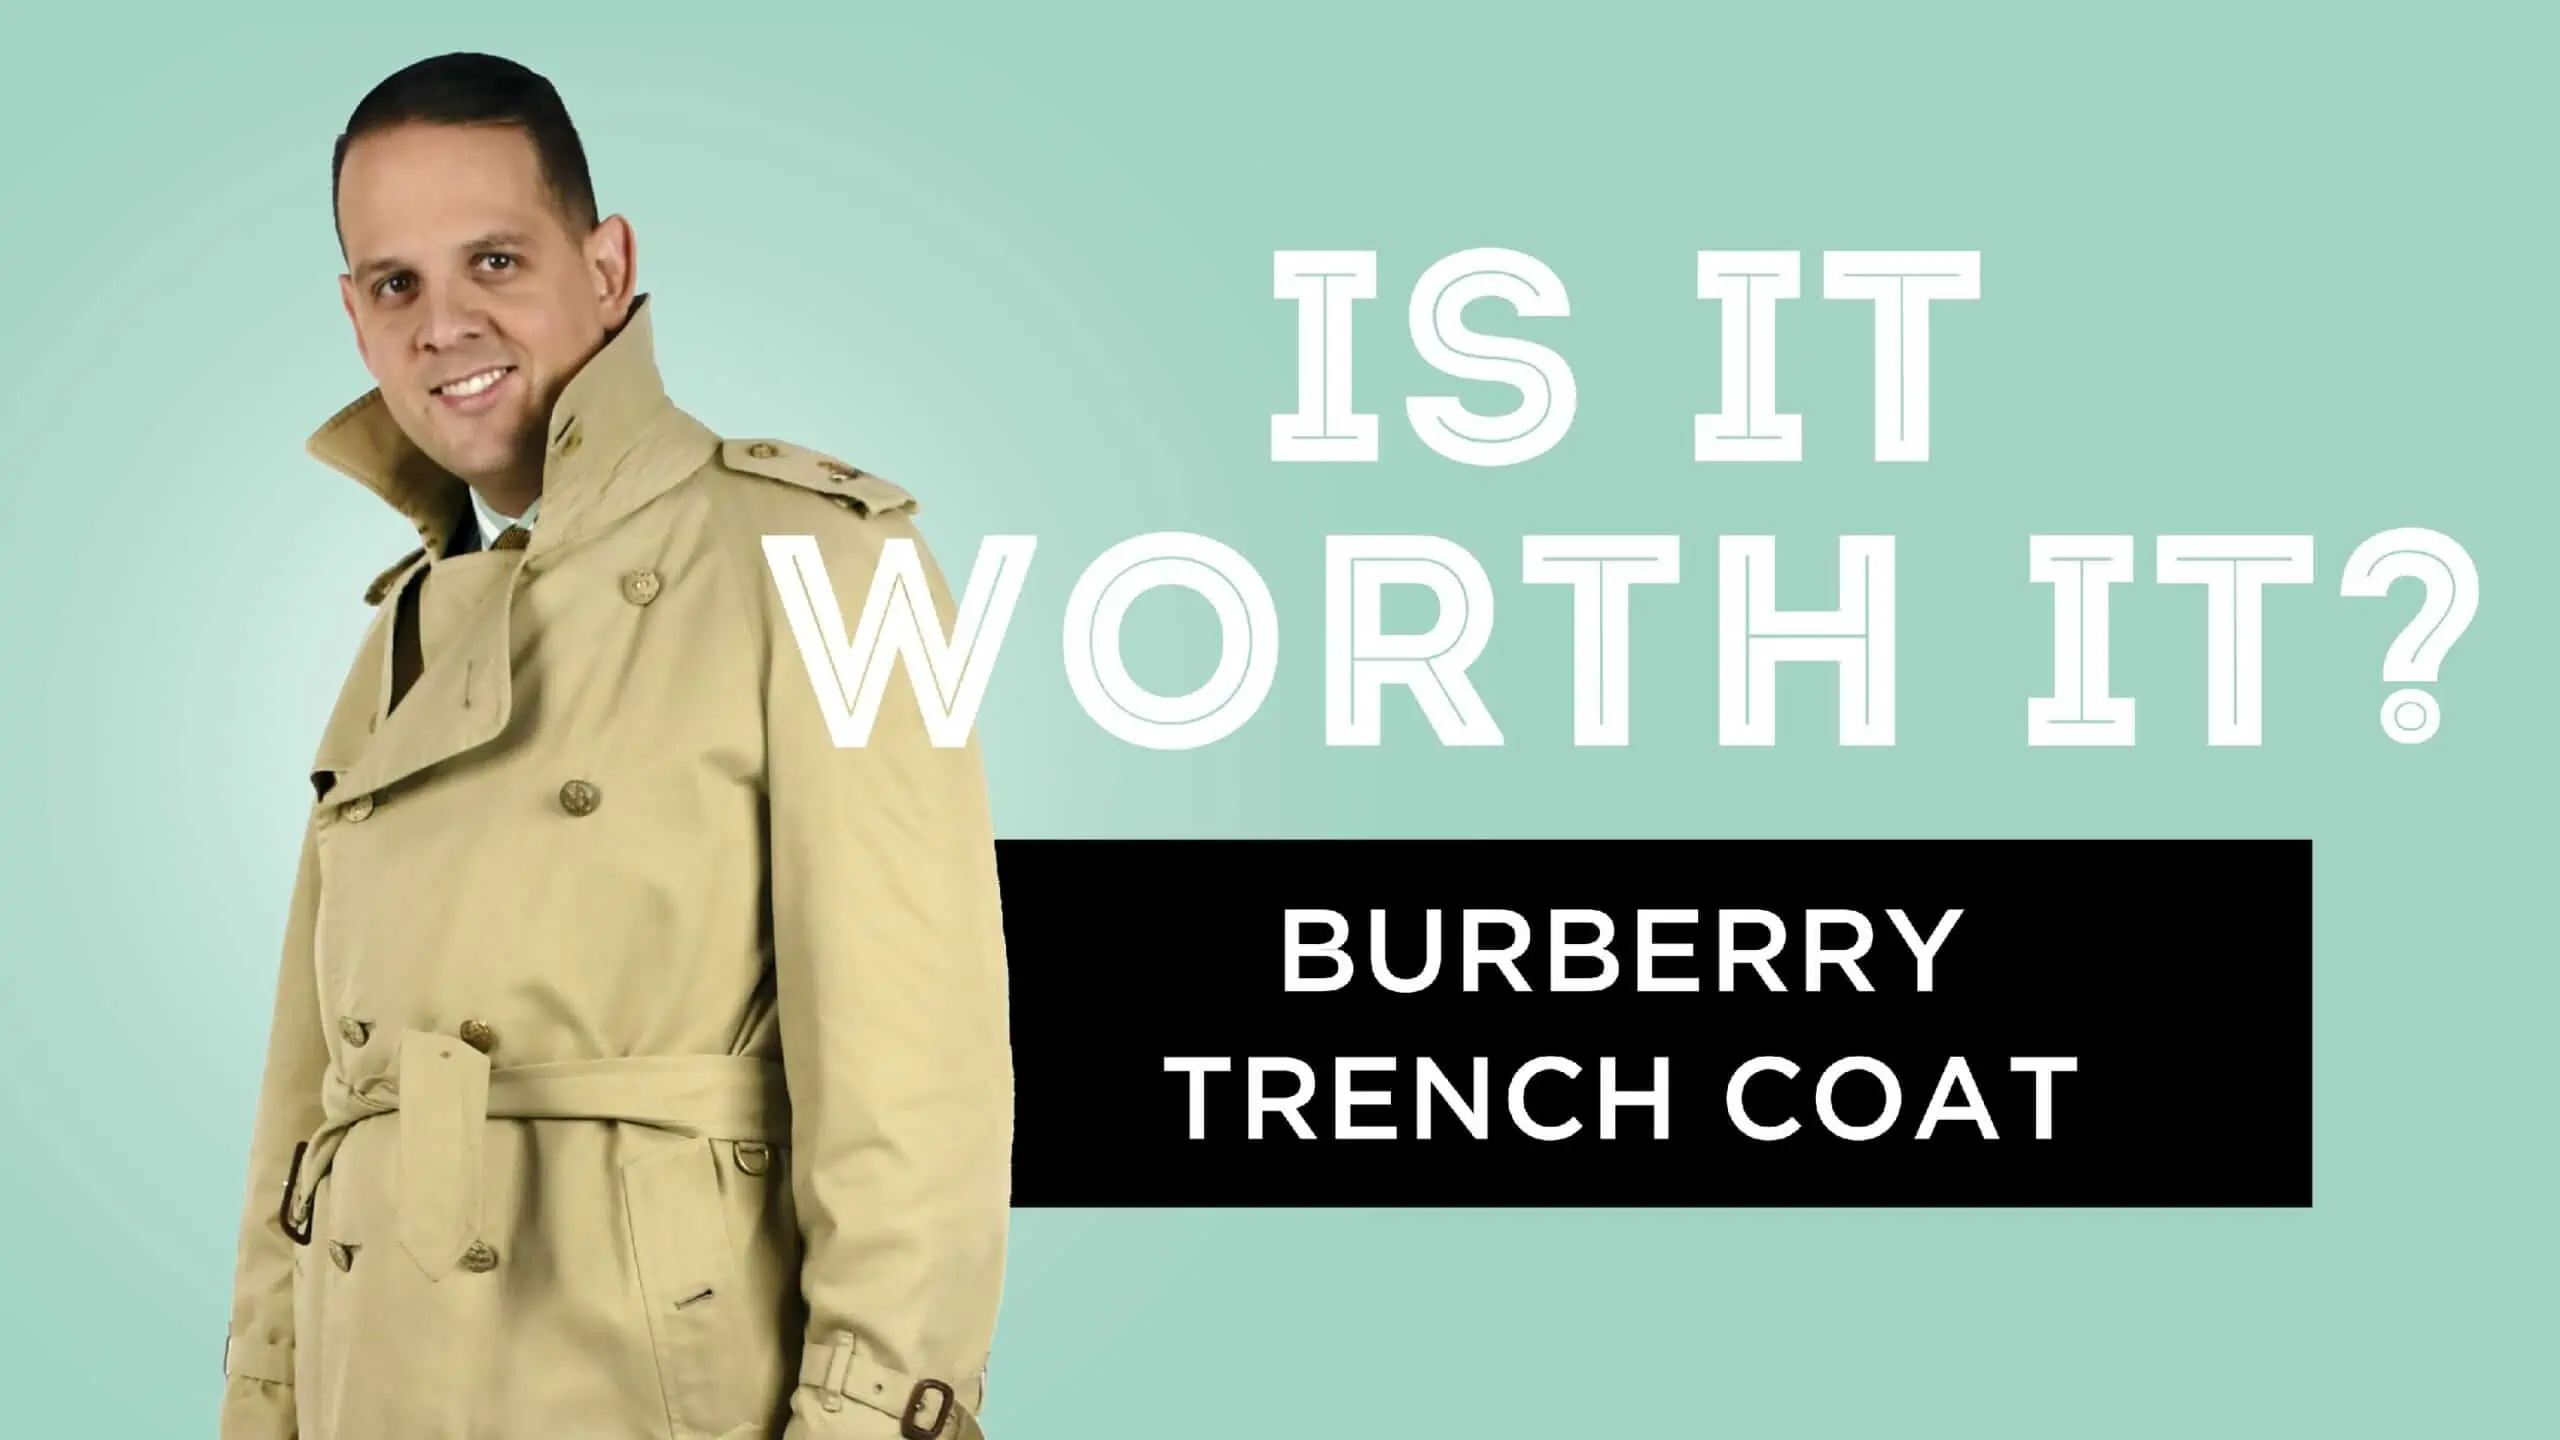 Burberry Trench Coats Are Worth the Investment